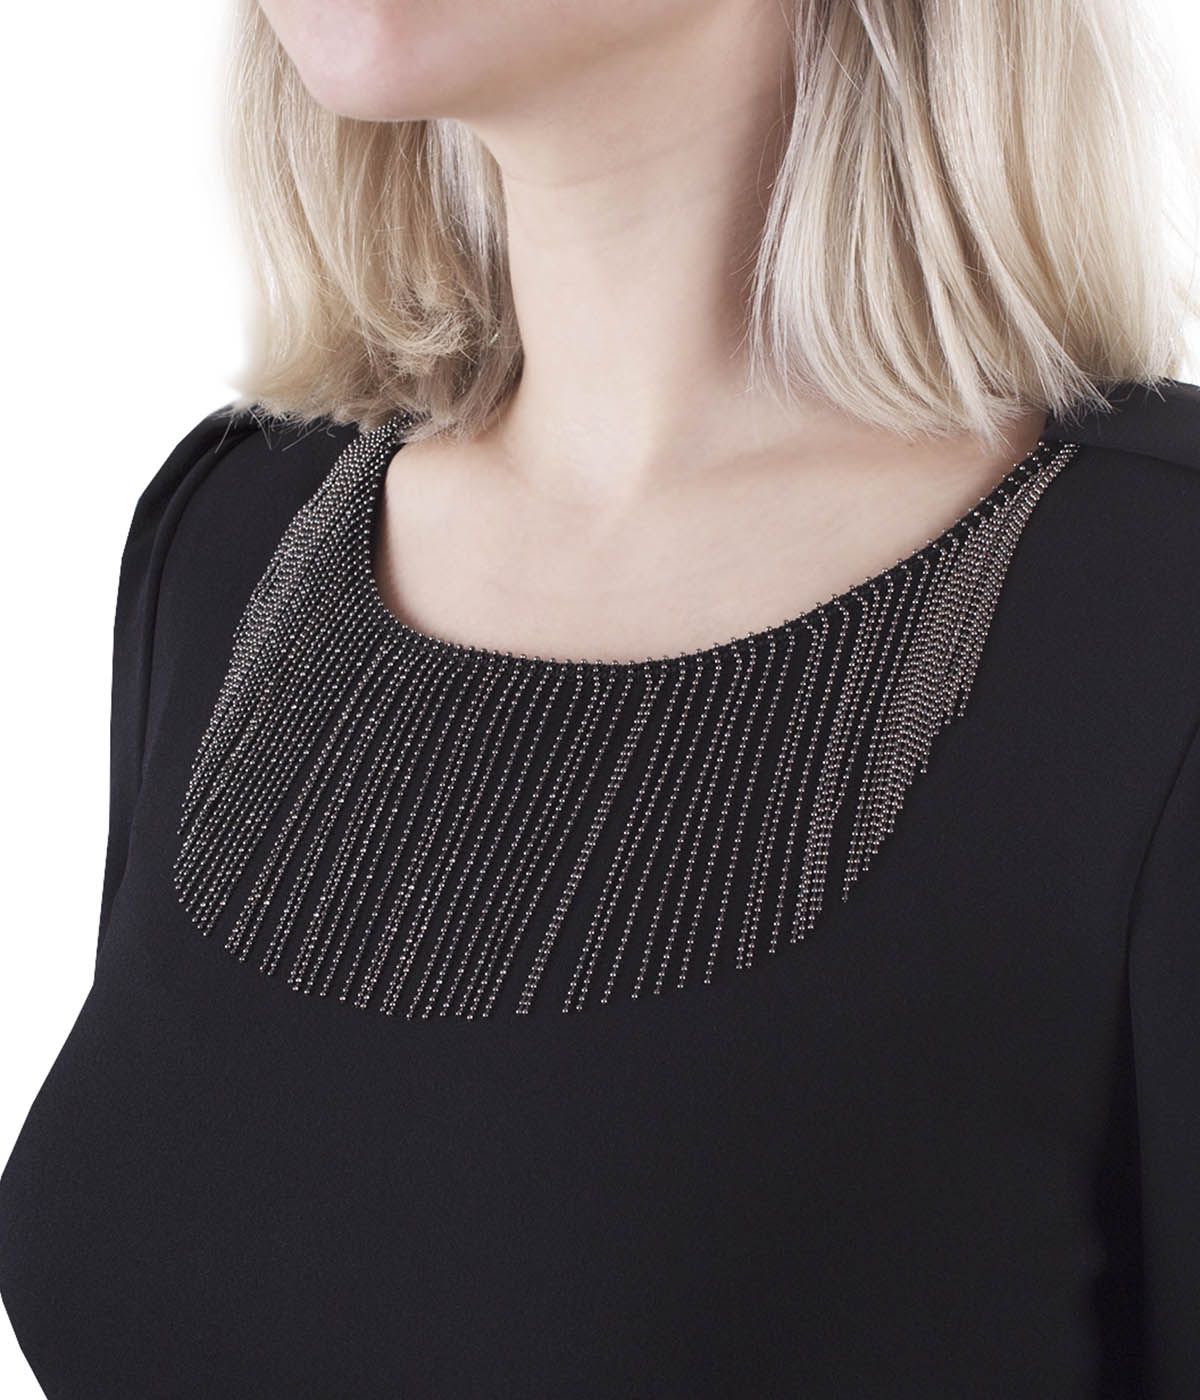 Straigh dress with metallic fringe – necklace type on the neckline area 3